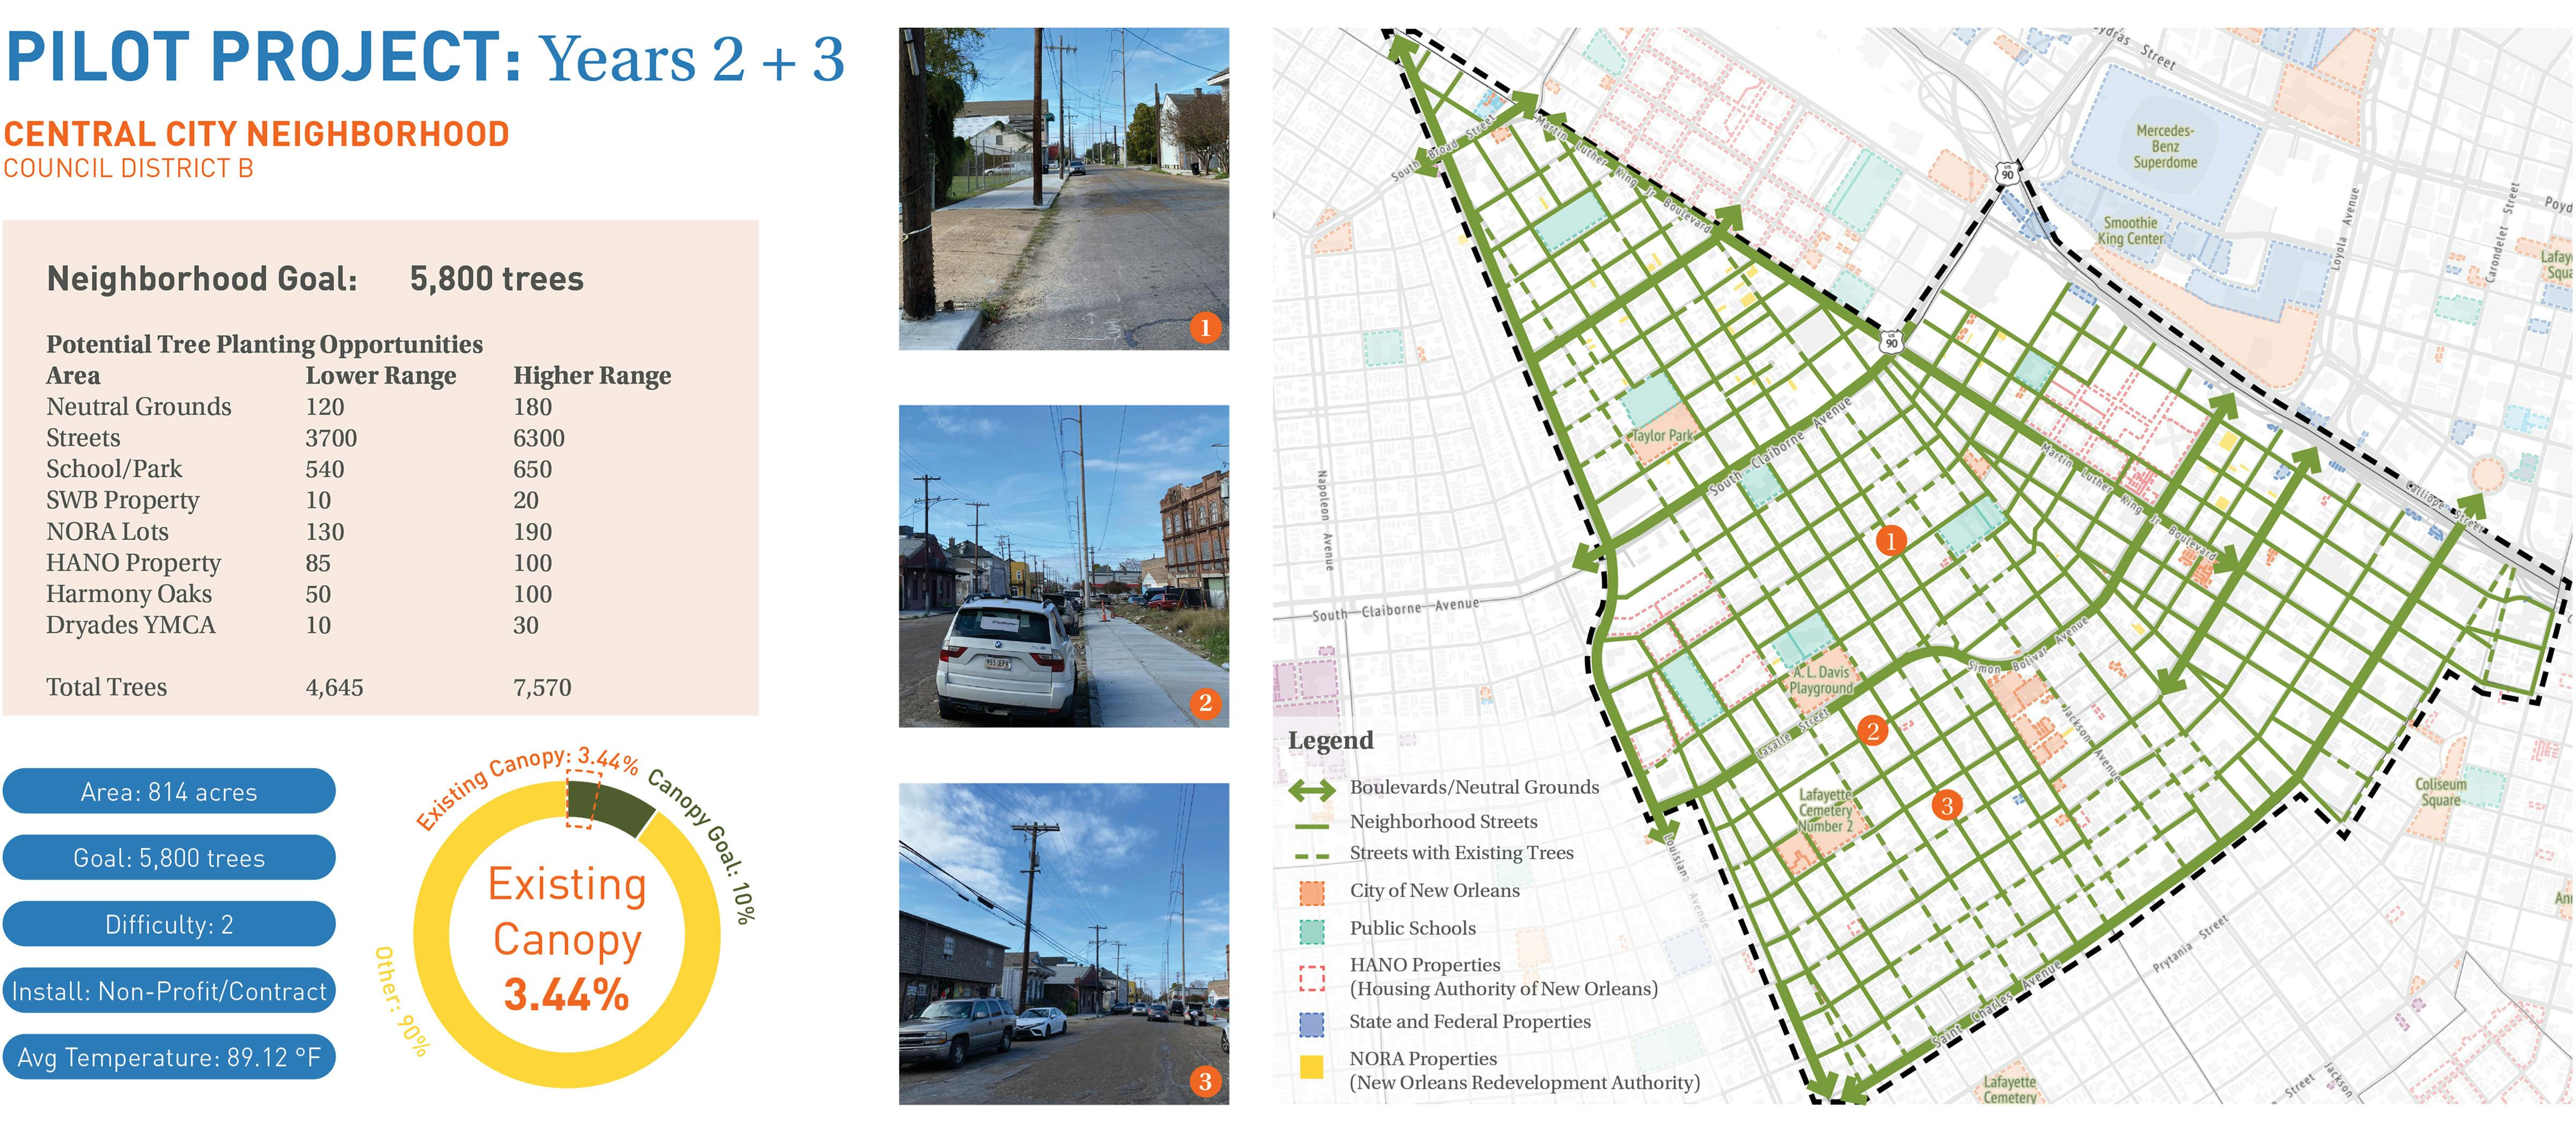 Pilot projects illustrates recommendations for years 2 and 3 for Central City Neighborhood, illustrating a goal of 5,800 trees and potential tree planting opportunity areas.